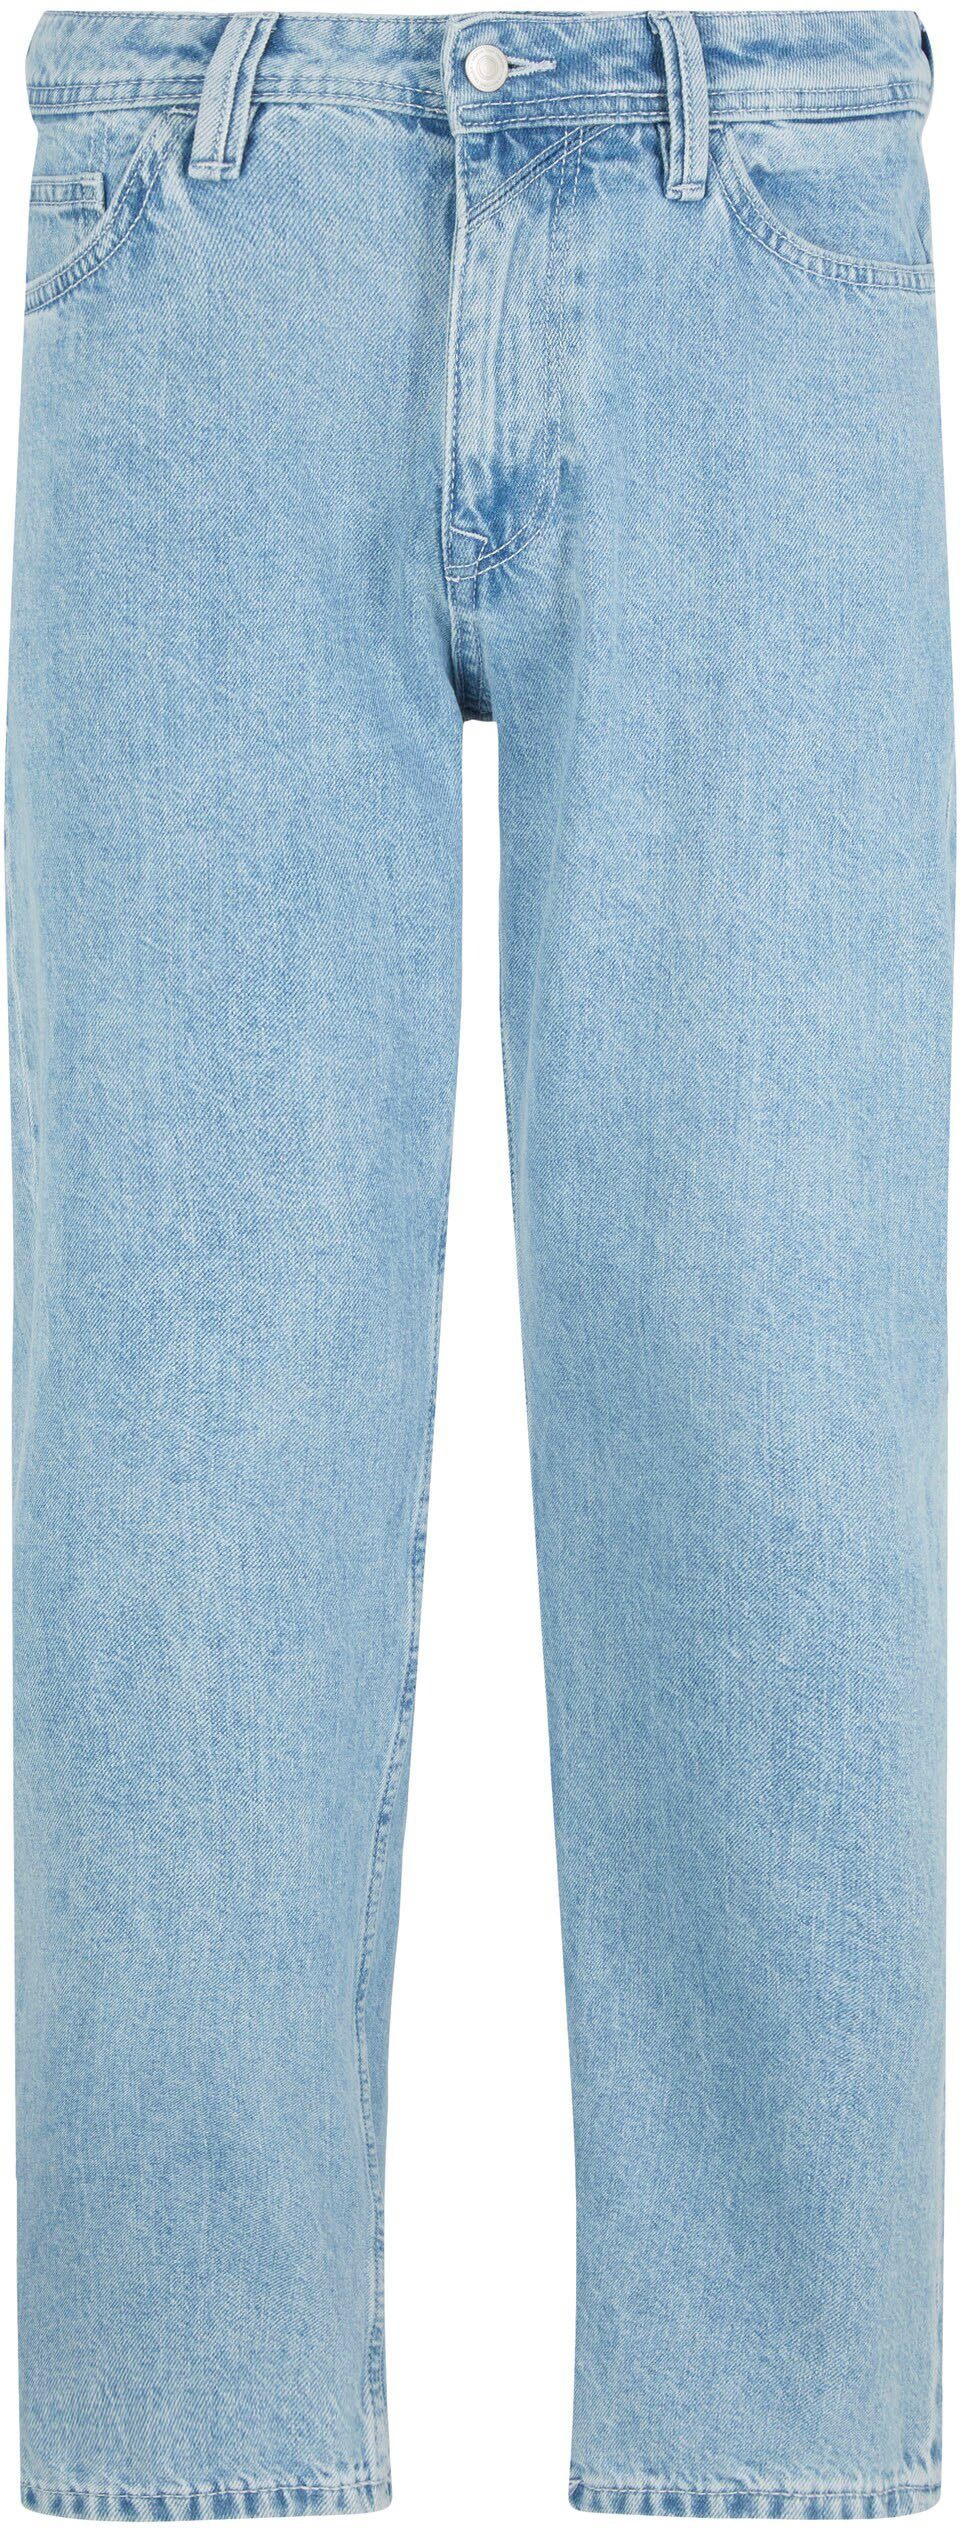 Denim TAILOR clean Straight-Jeans bleached TOM